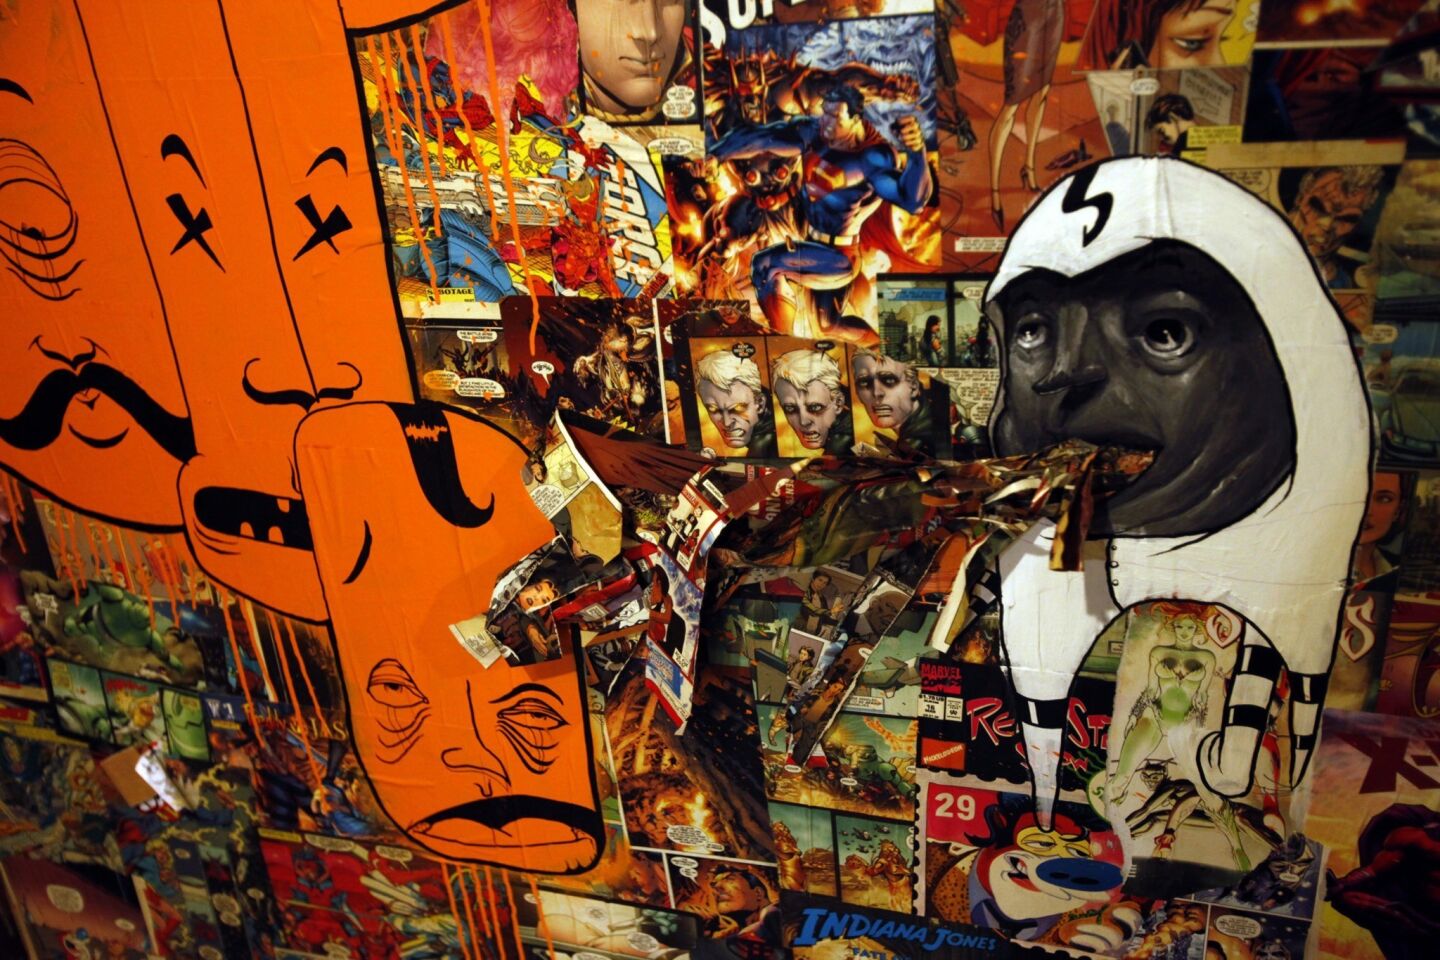 Artist Nick Lord created the comic book wallpaper.